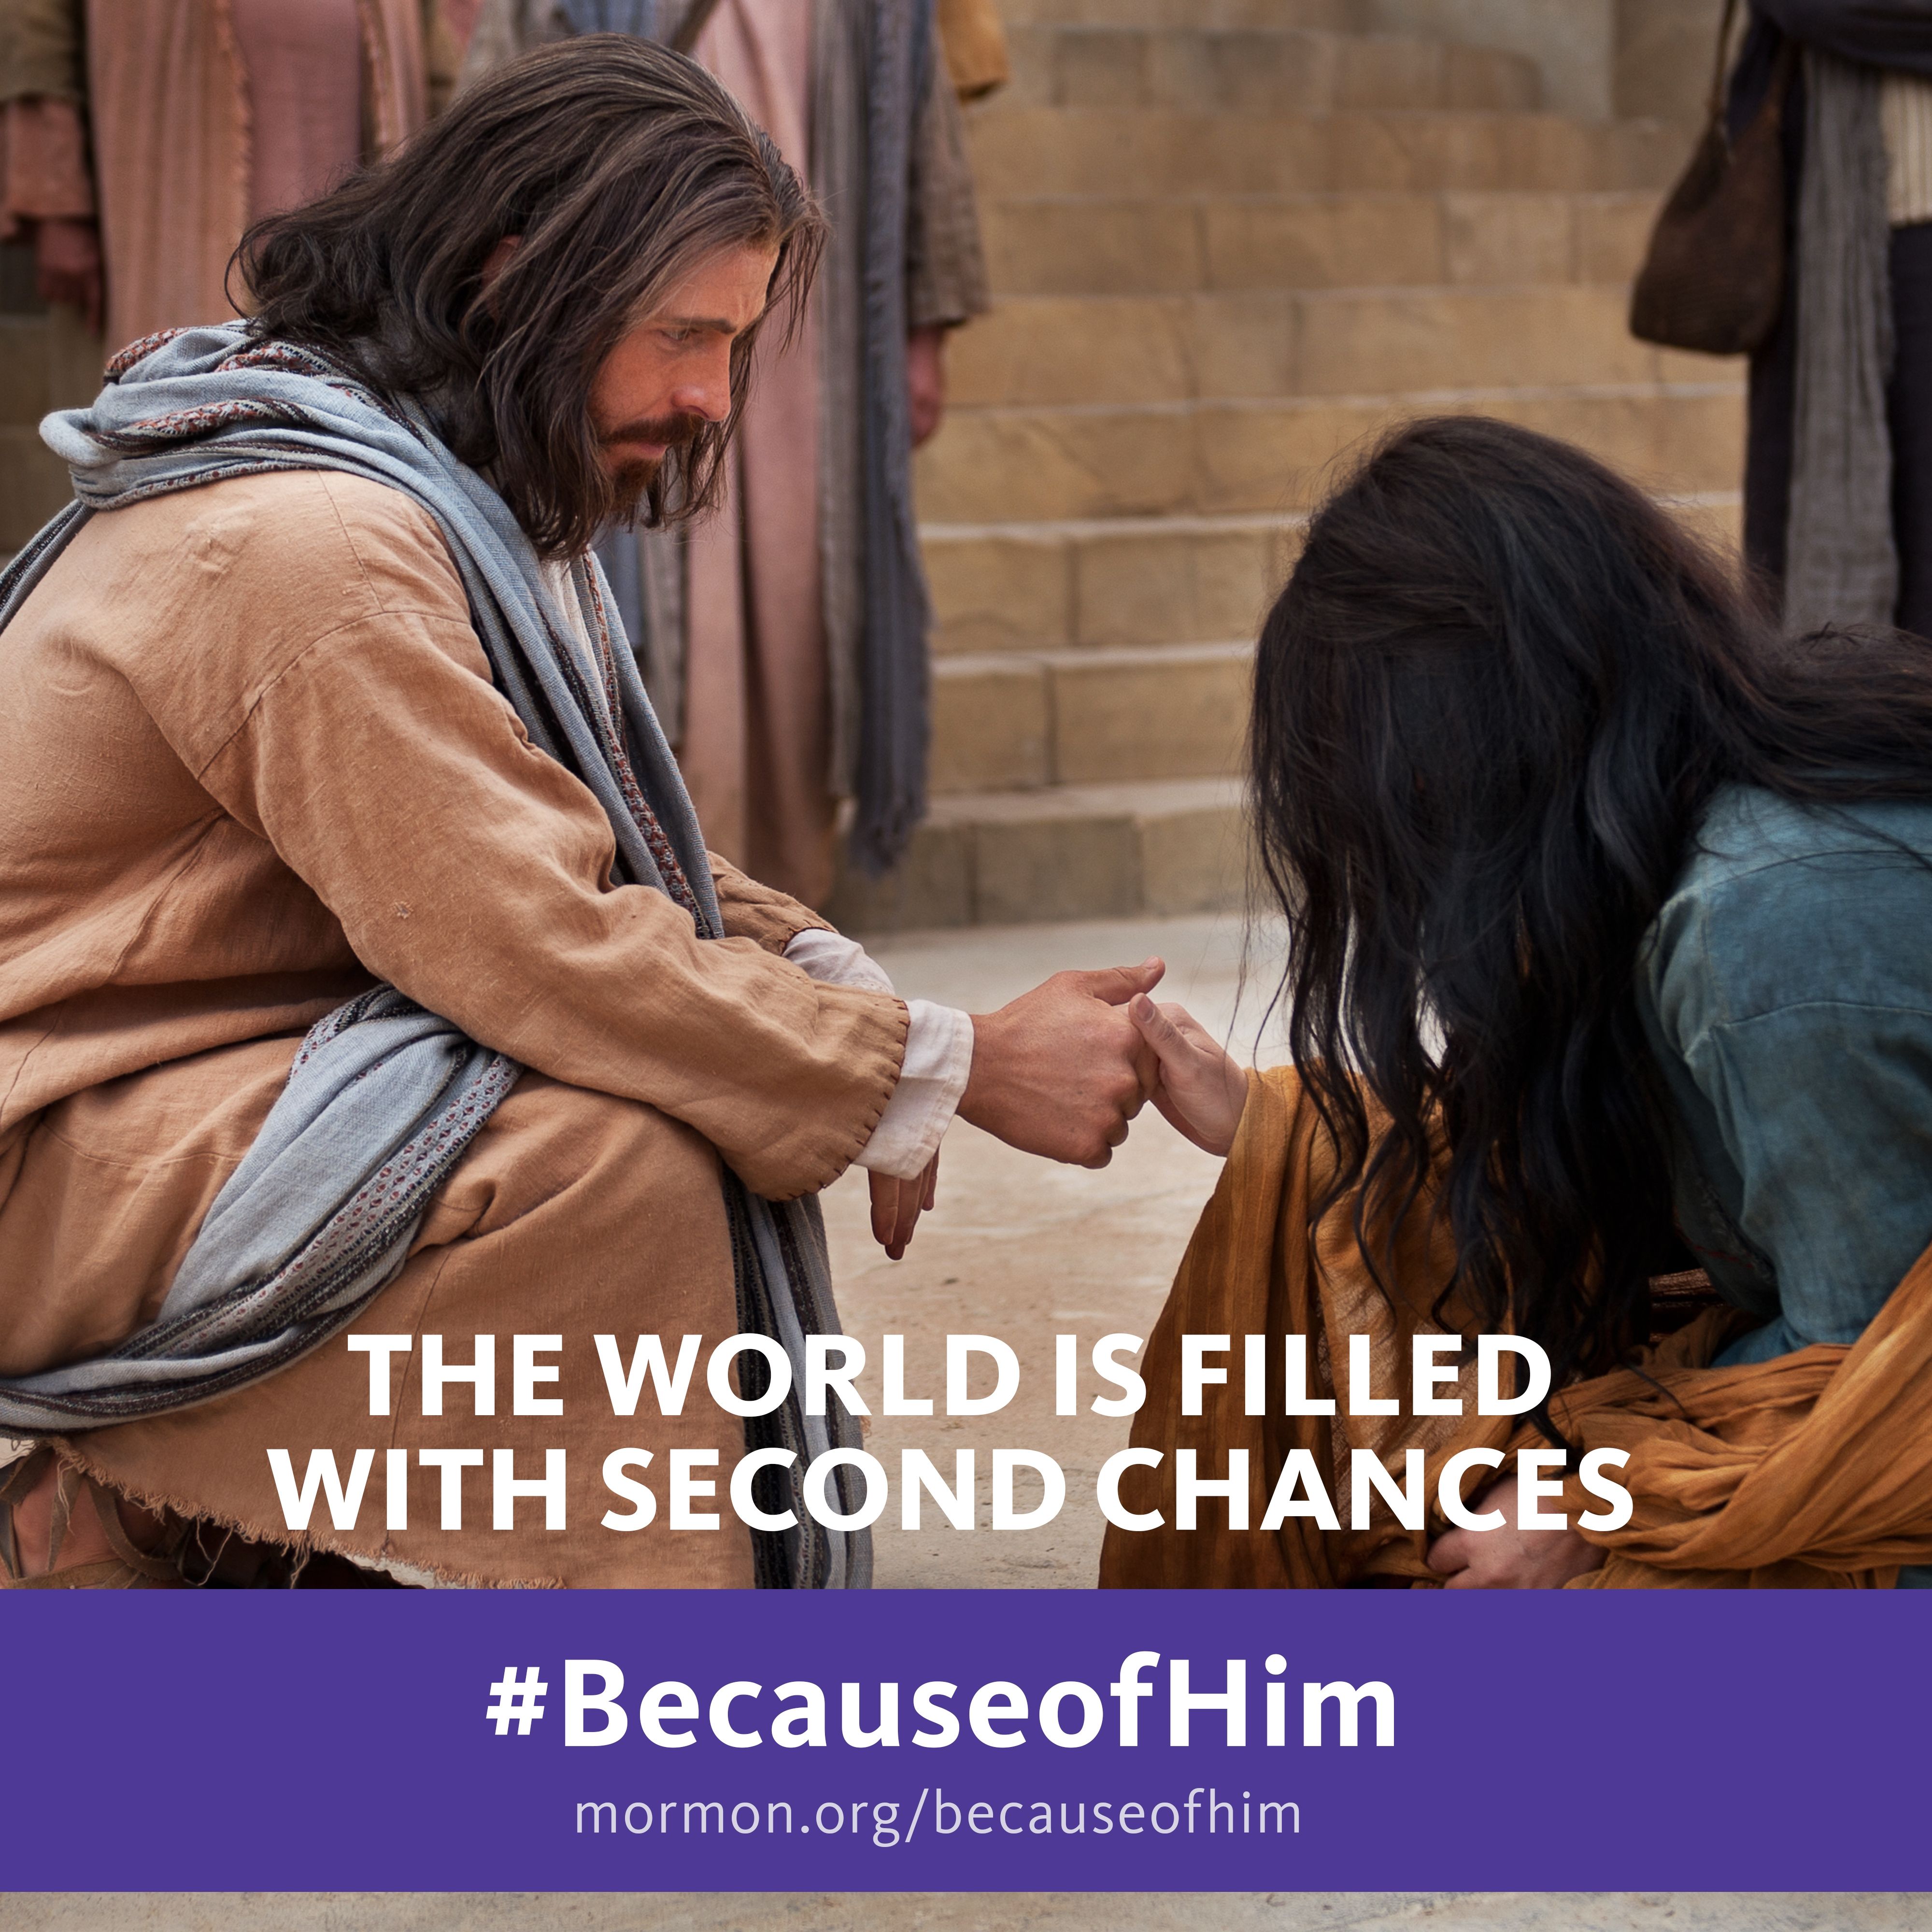 The world is filled with second chances. #BecauseofHim, mormon.org/becauseofhim © undefined ipCode 1.